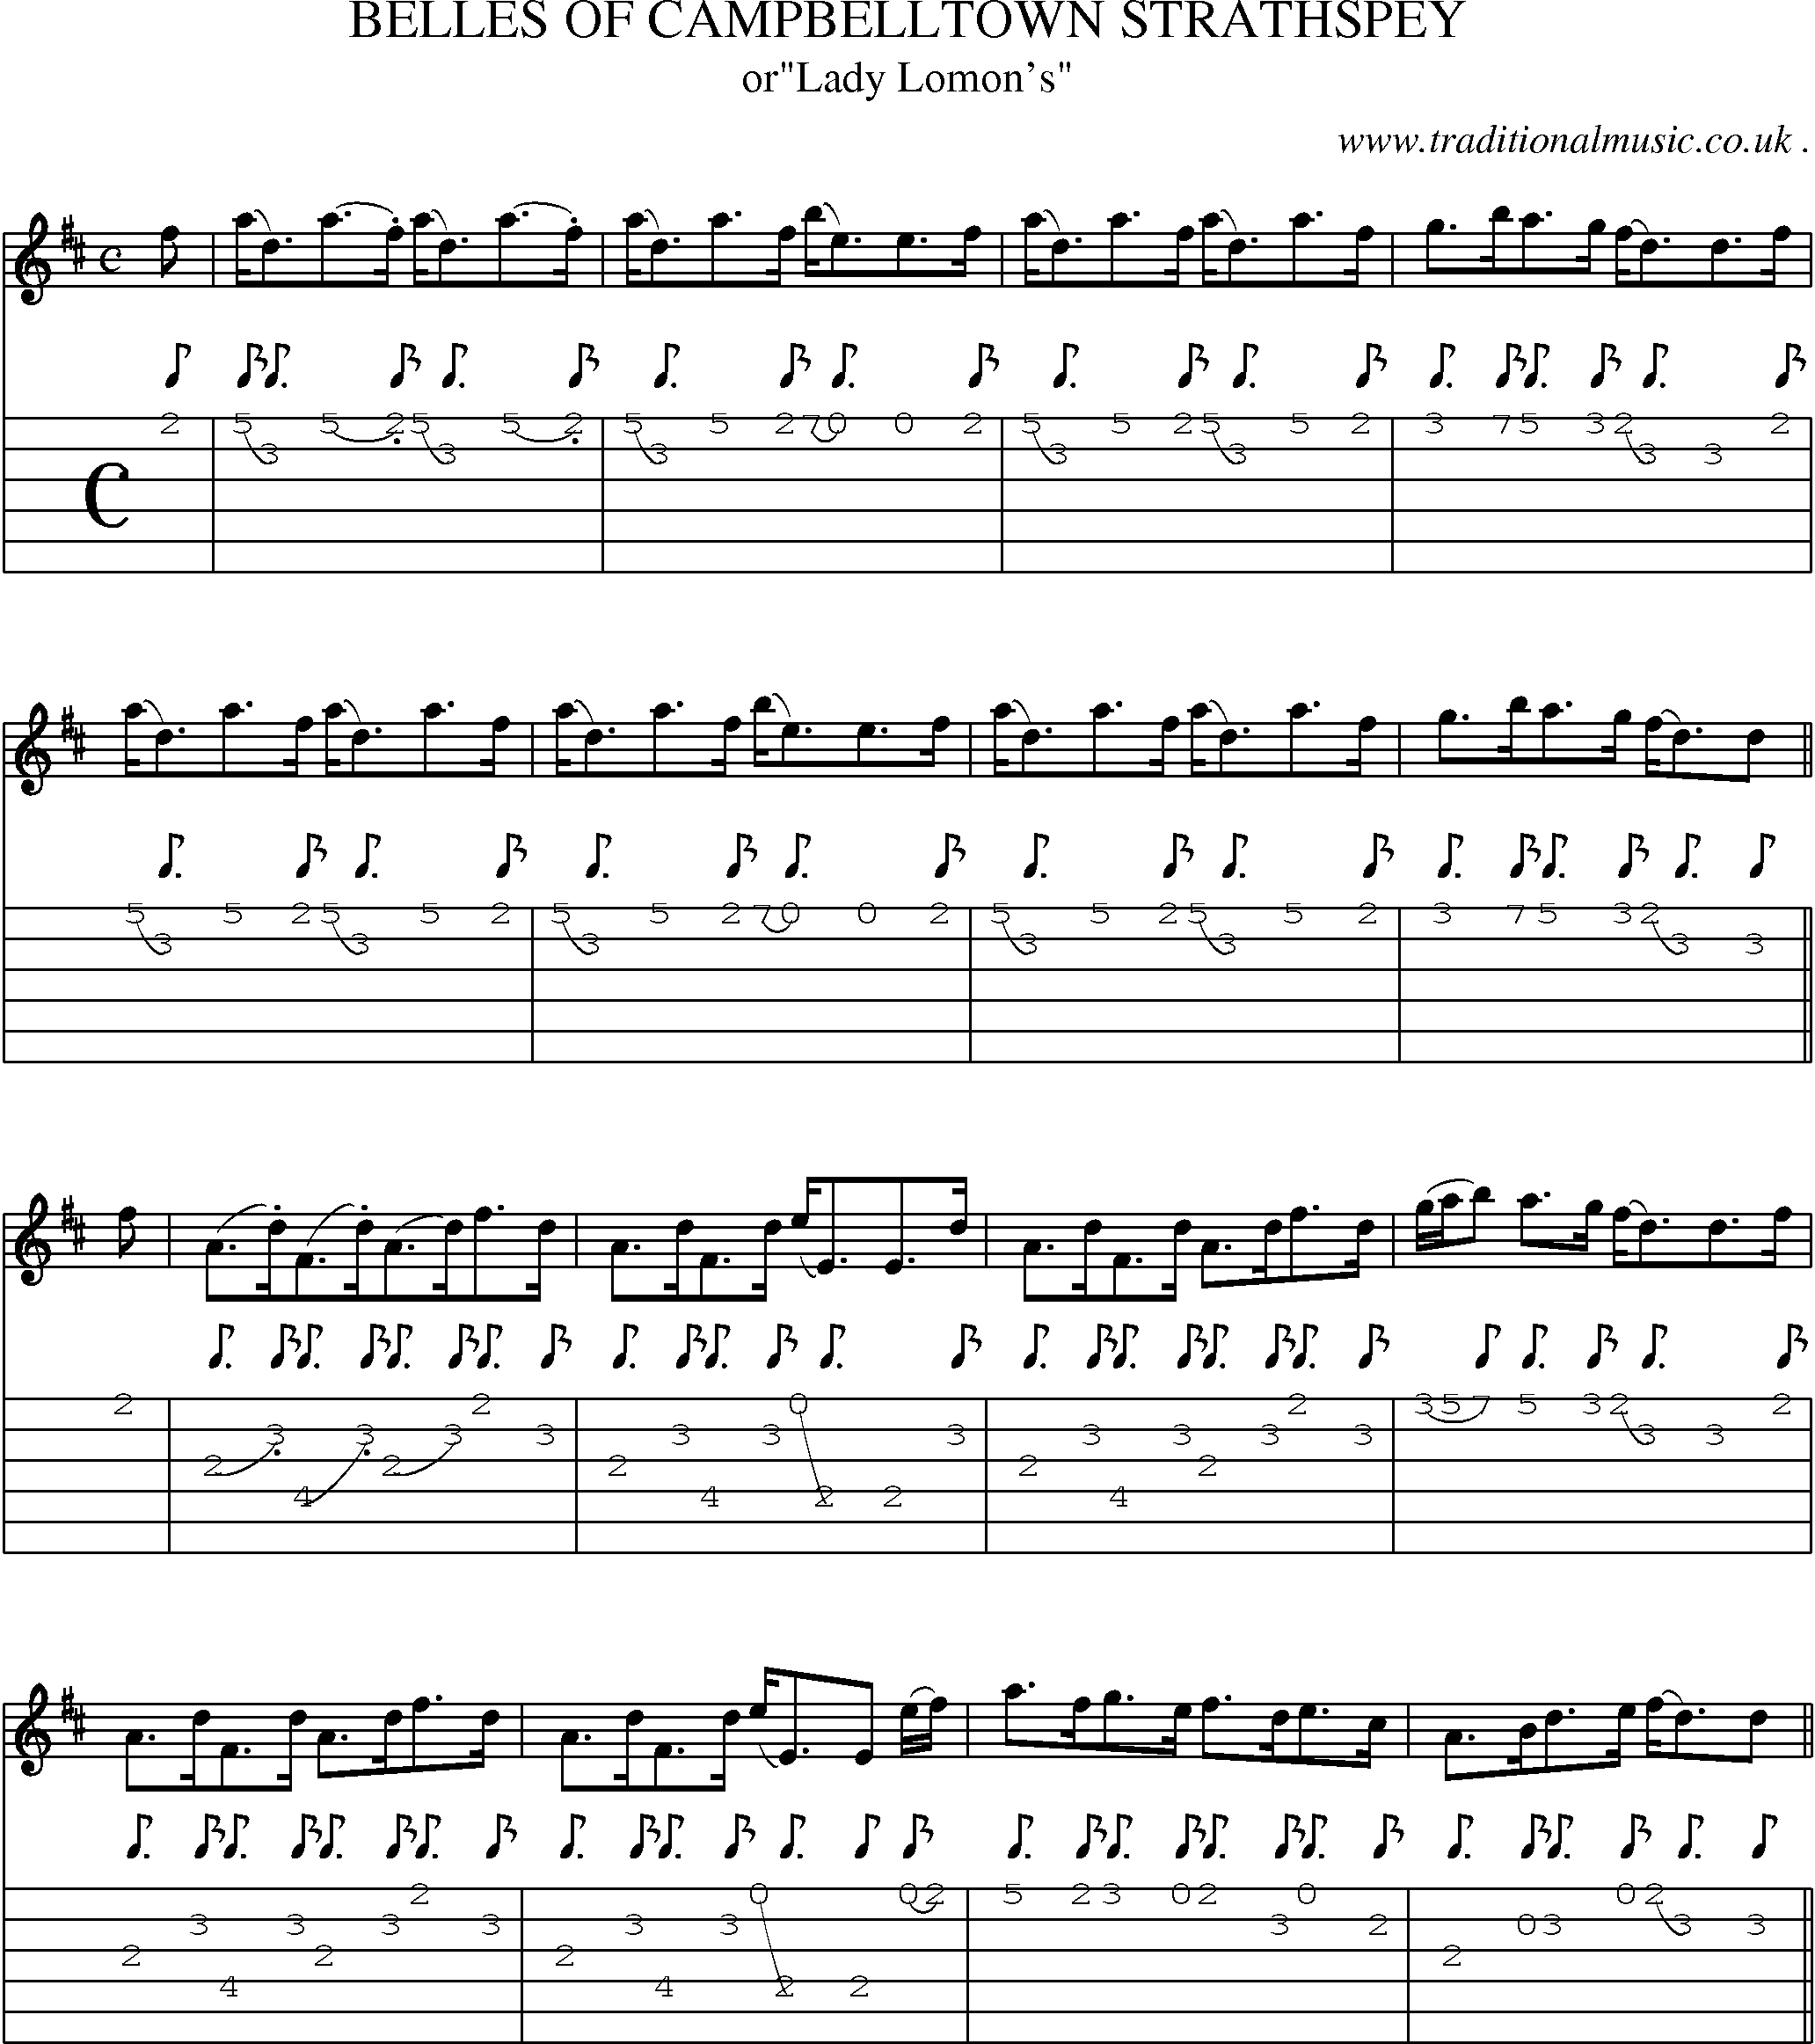 Sheet-Music and Guitar Tabs for Belles Of Campbelltown Strathspey